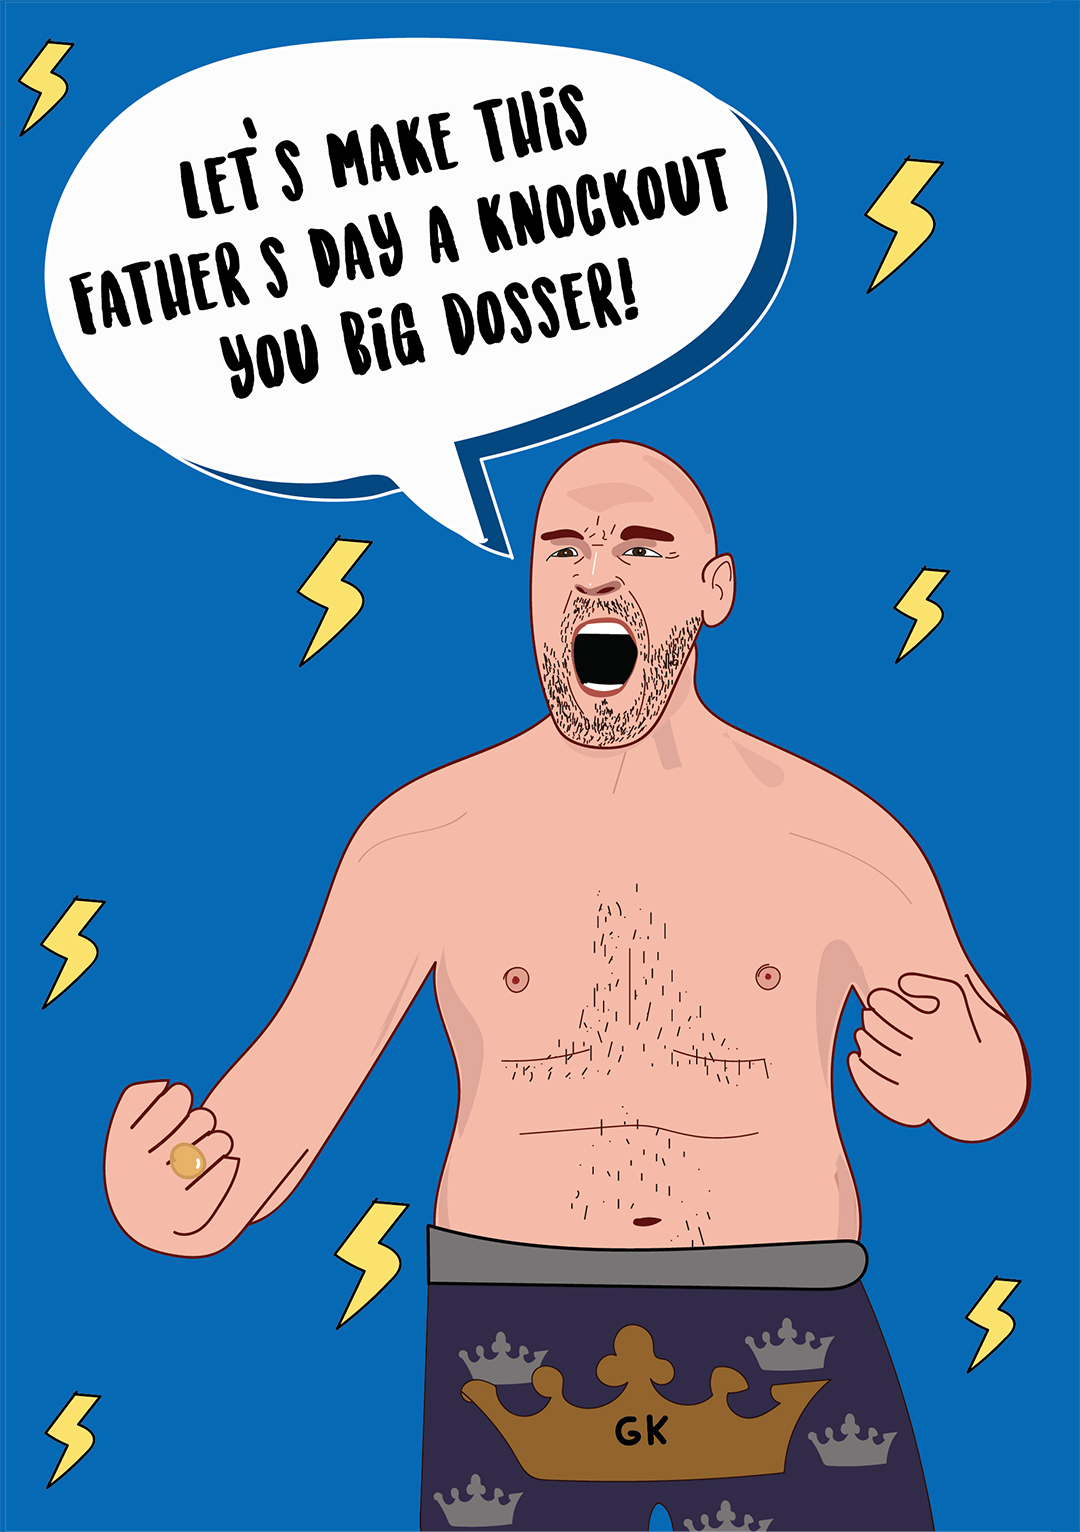 Let's Make This Father's Day A Knockout You Big Dosser! - Tyson Fury